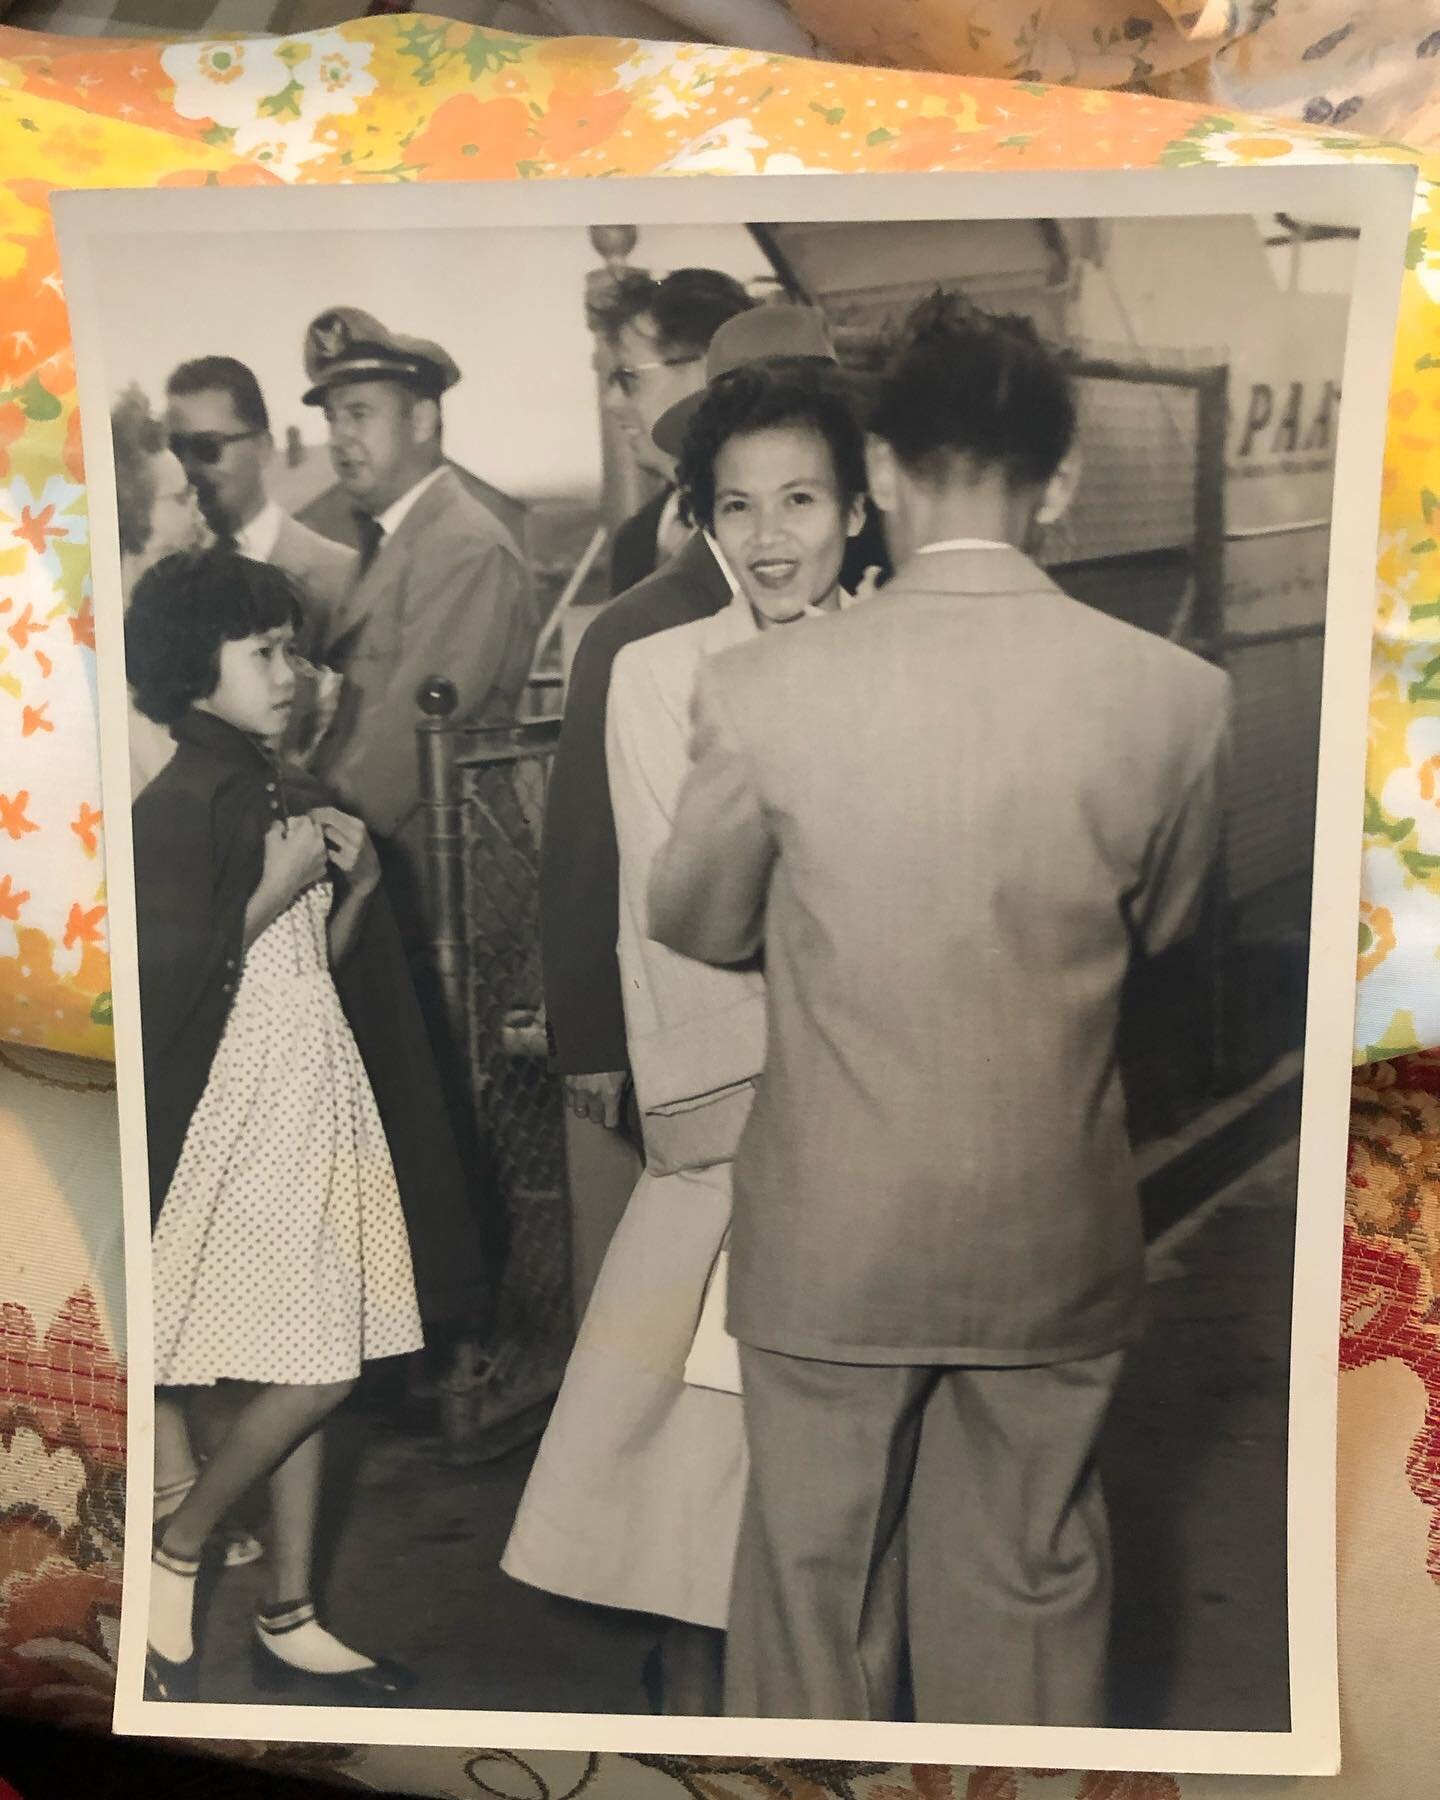 My Grandma Loling (yes Loling) touching US soil for the first time in 1953, at 27 years old.  My Grandpa Candido is facing her.  He was 17 years her senior and a steward for the US Merchant Marines.  He originally came to the US in 1928, at 19 years 